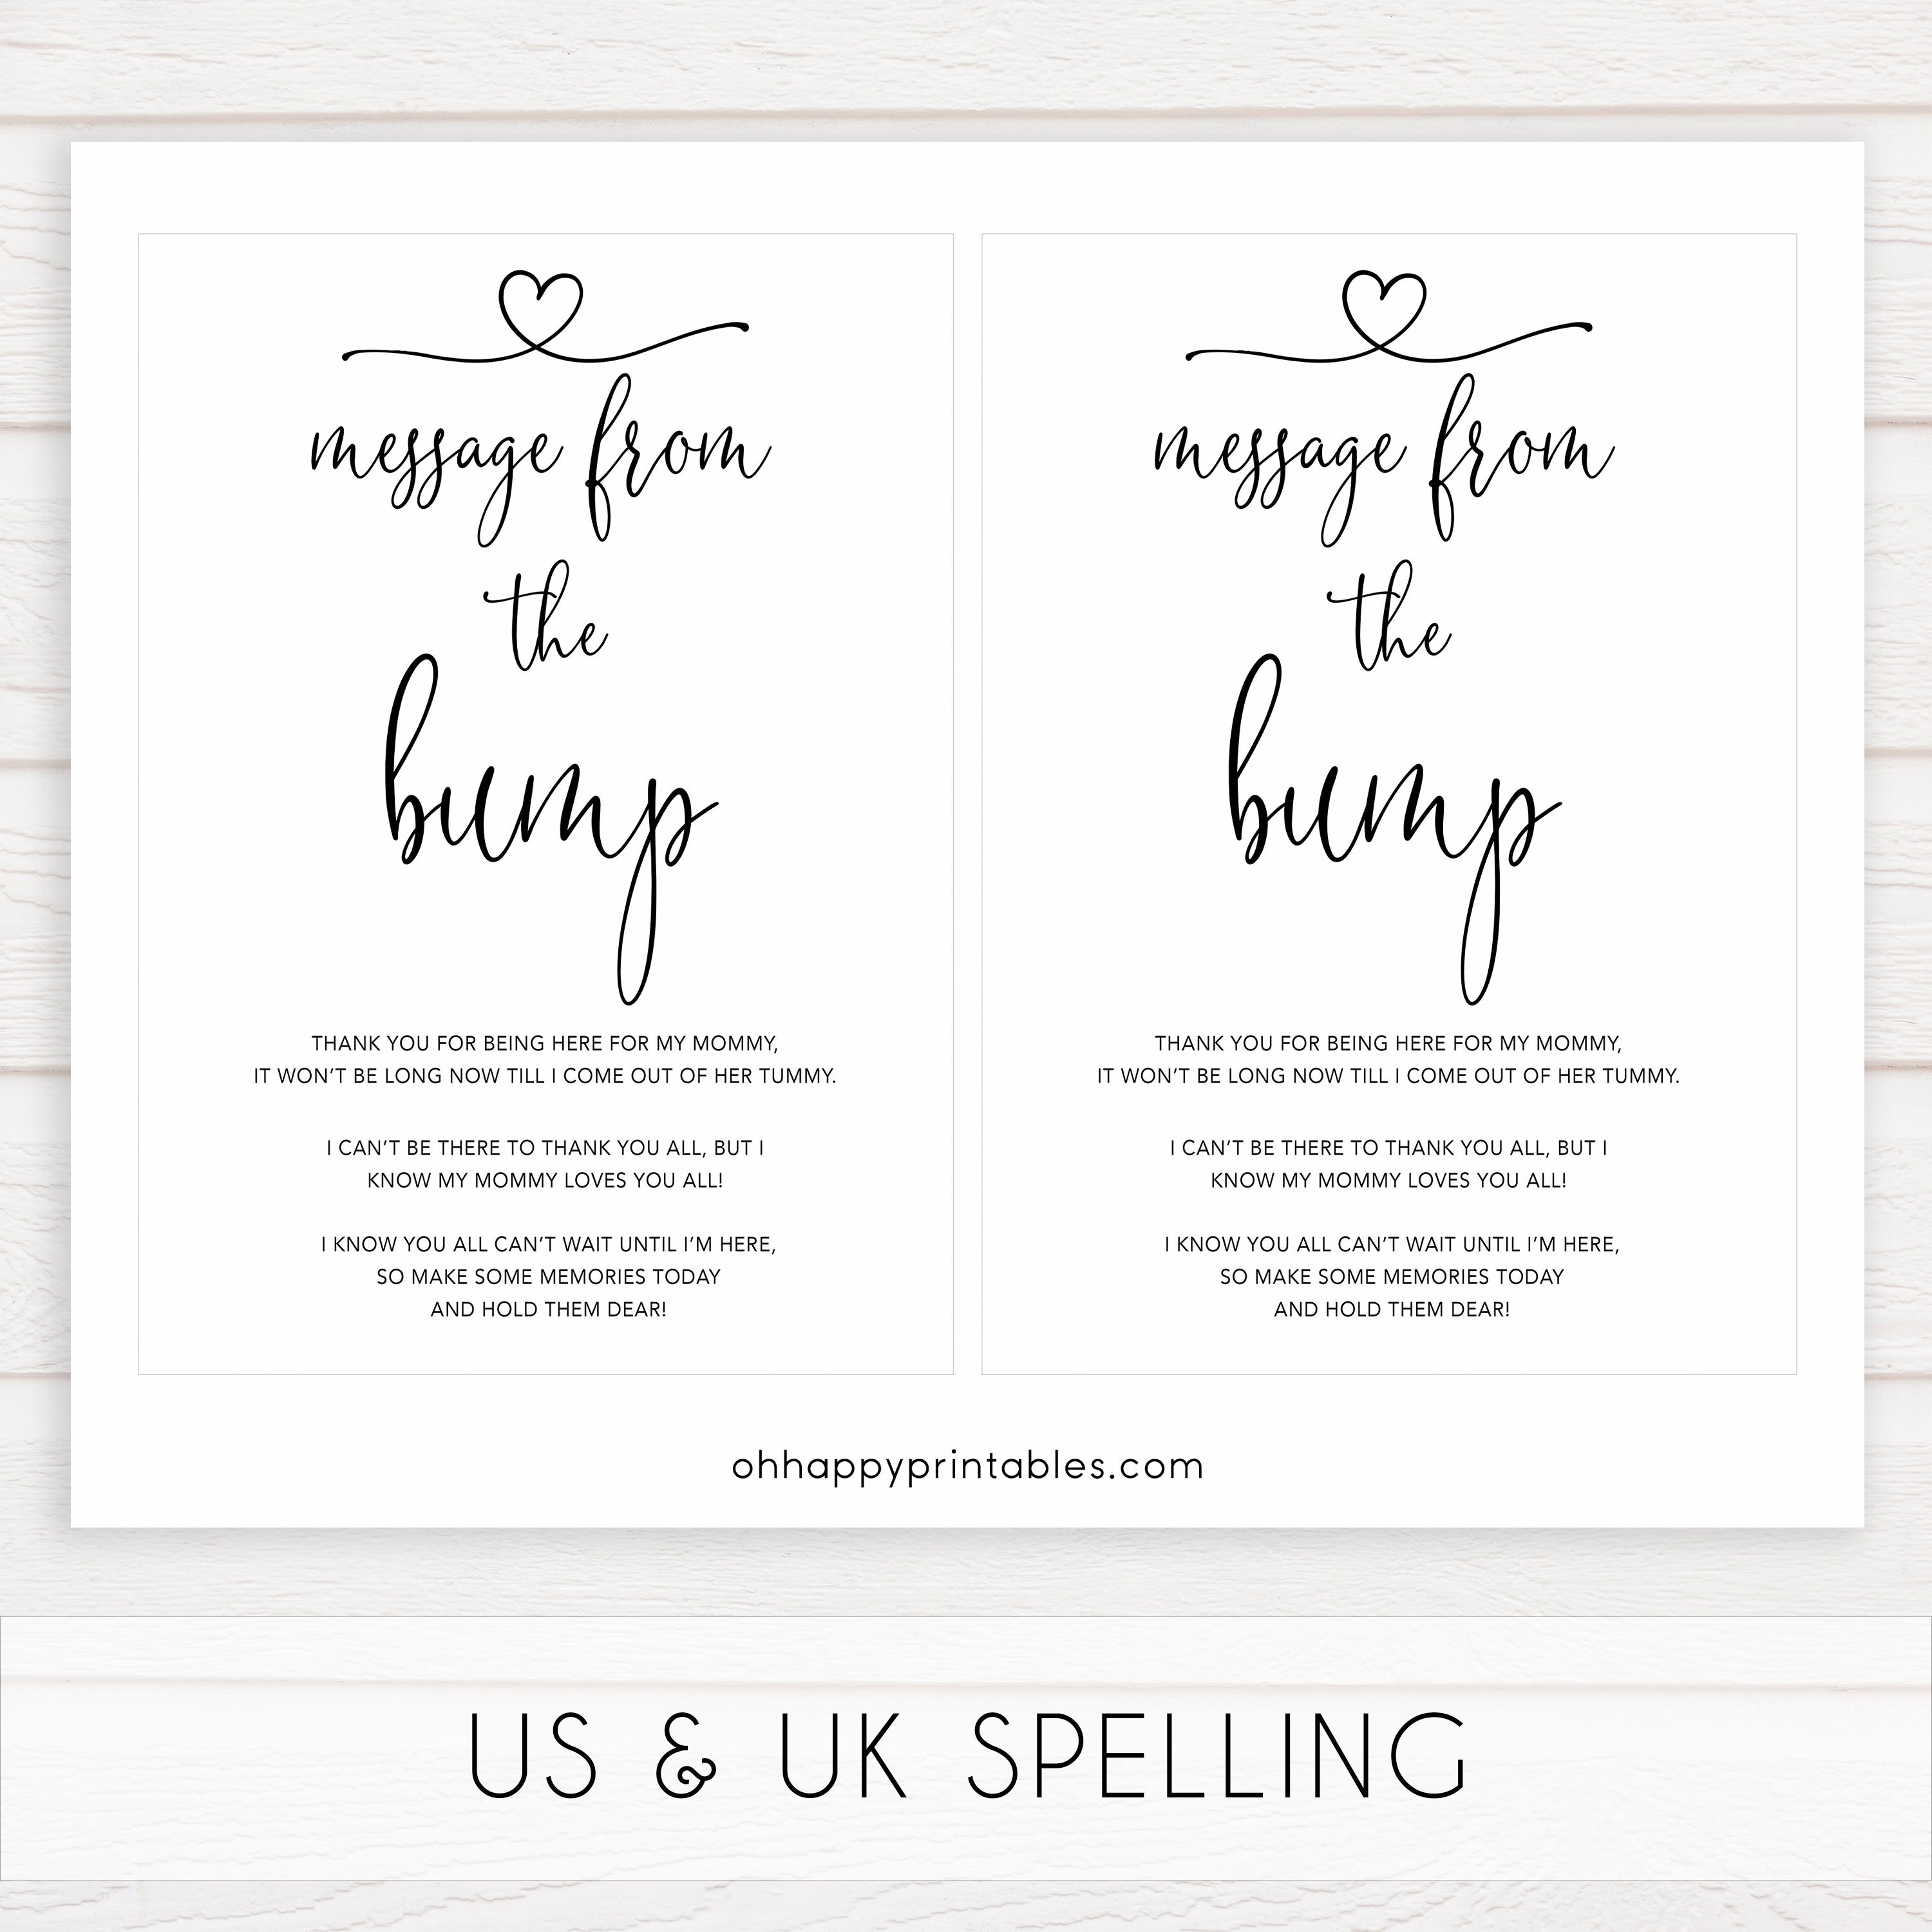 Minimalist baby shower games, message from the bump baby games, 10 baby game bundles, fun baby games, printable baby games, top baby games, popular baby games, labor or porn games, neutral baby games, gender reveal games